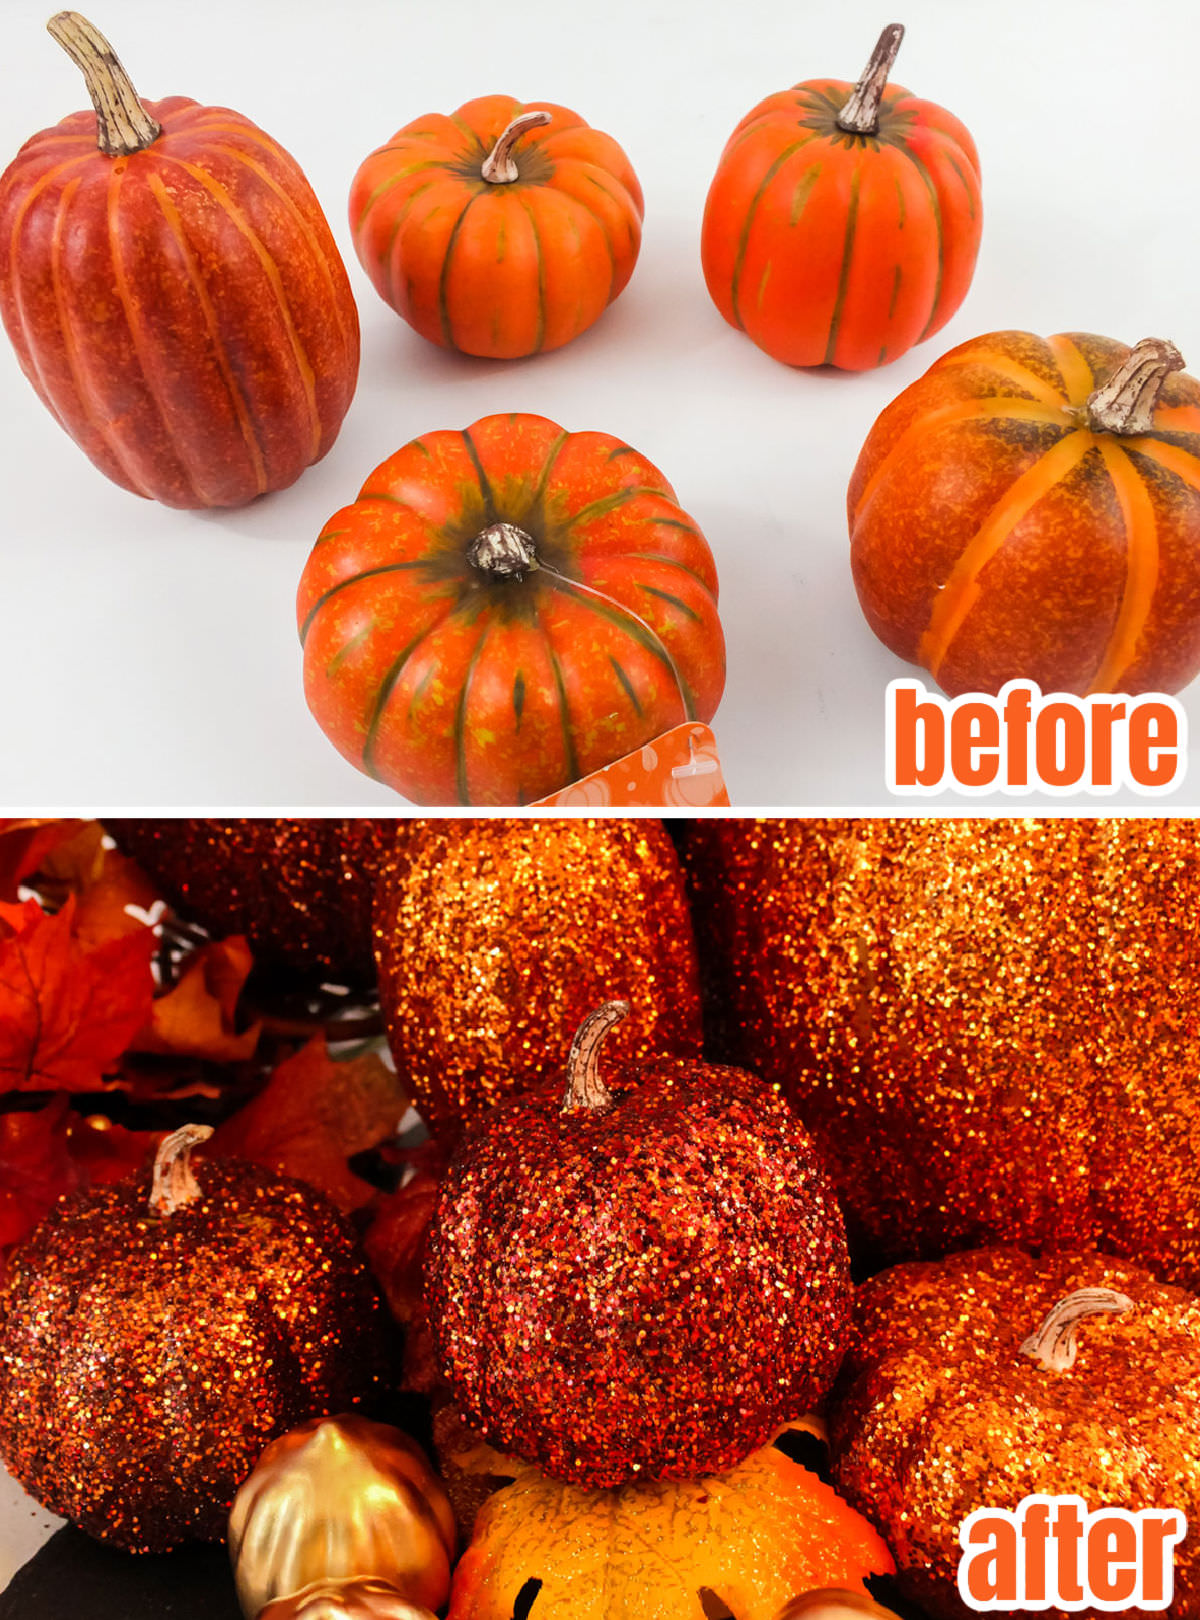 Collage image showing the faux pumpkins before the glitter was added and after the glitter has been added.